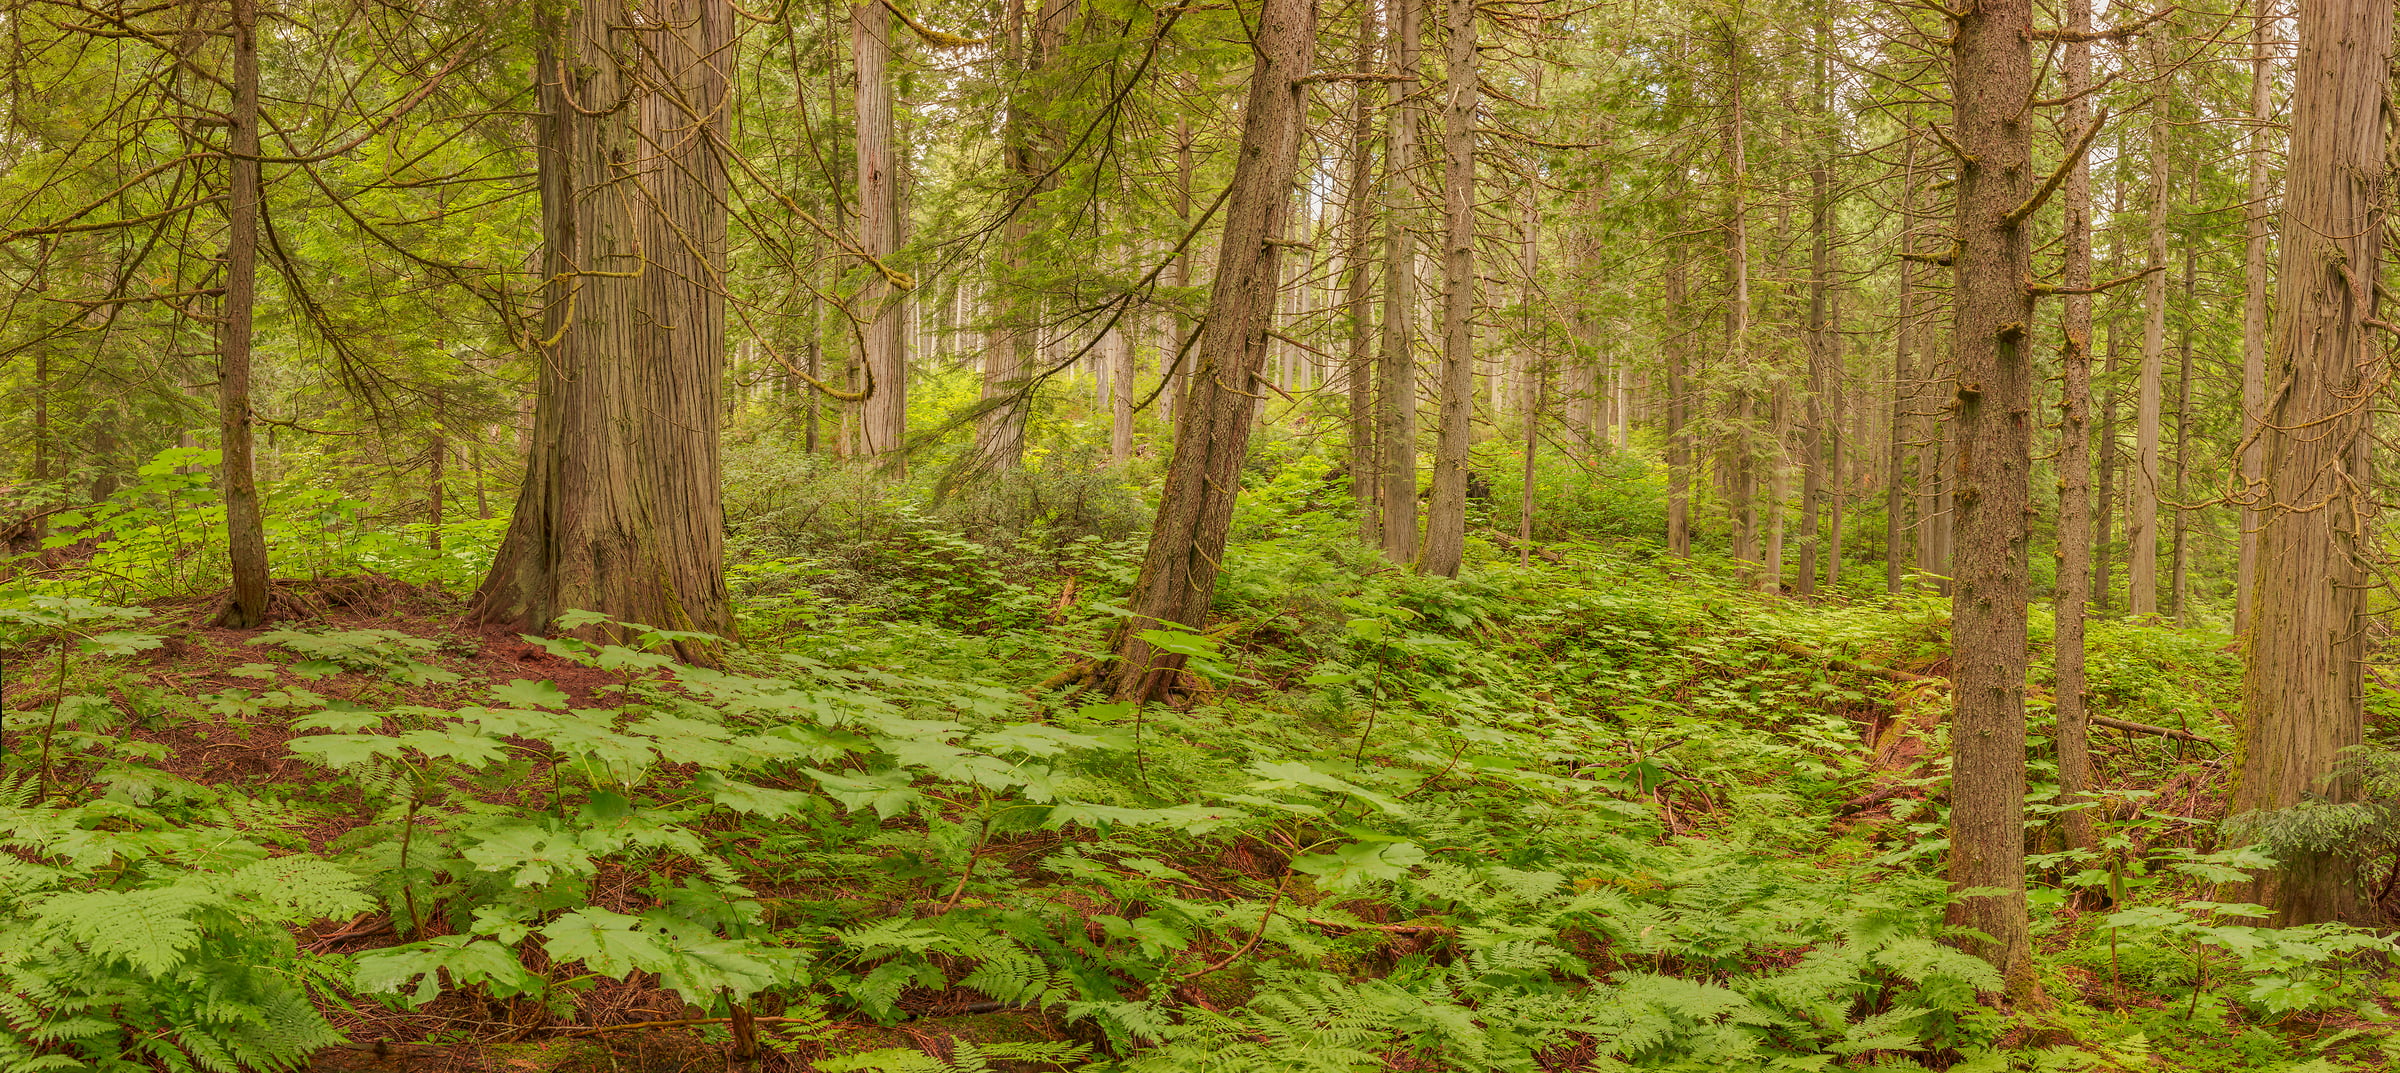 364 megapixels! A very high resolution, large-format VAST photo print of a natural forest scene; photograph created by John Freeman in Giant Cedars Boardwalk Trail, Mount Revelstoke National Park, British Columbia, Canada.